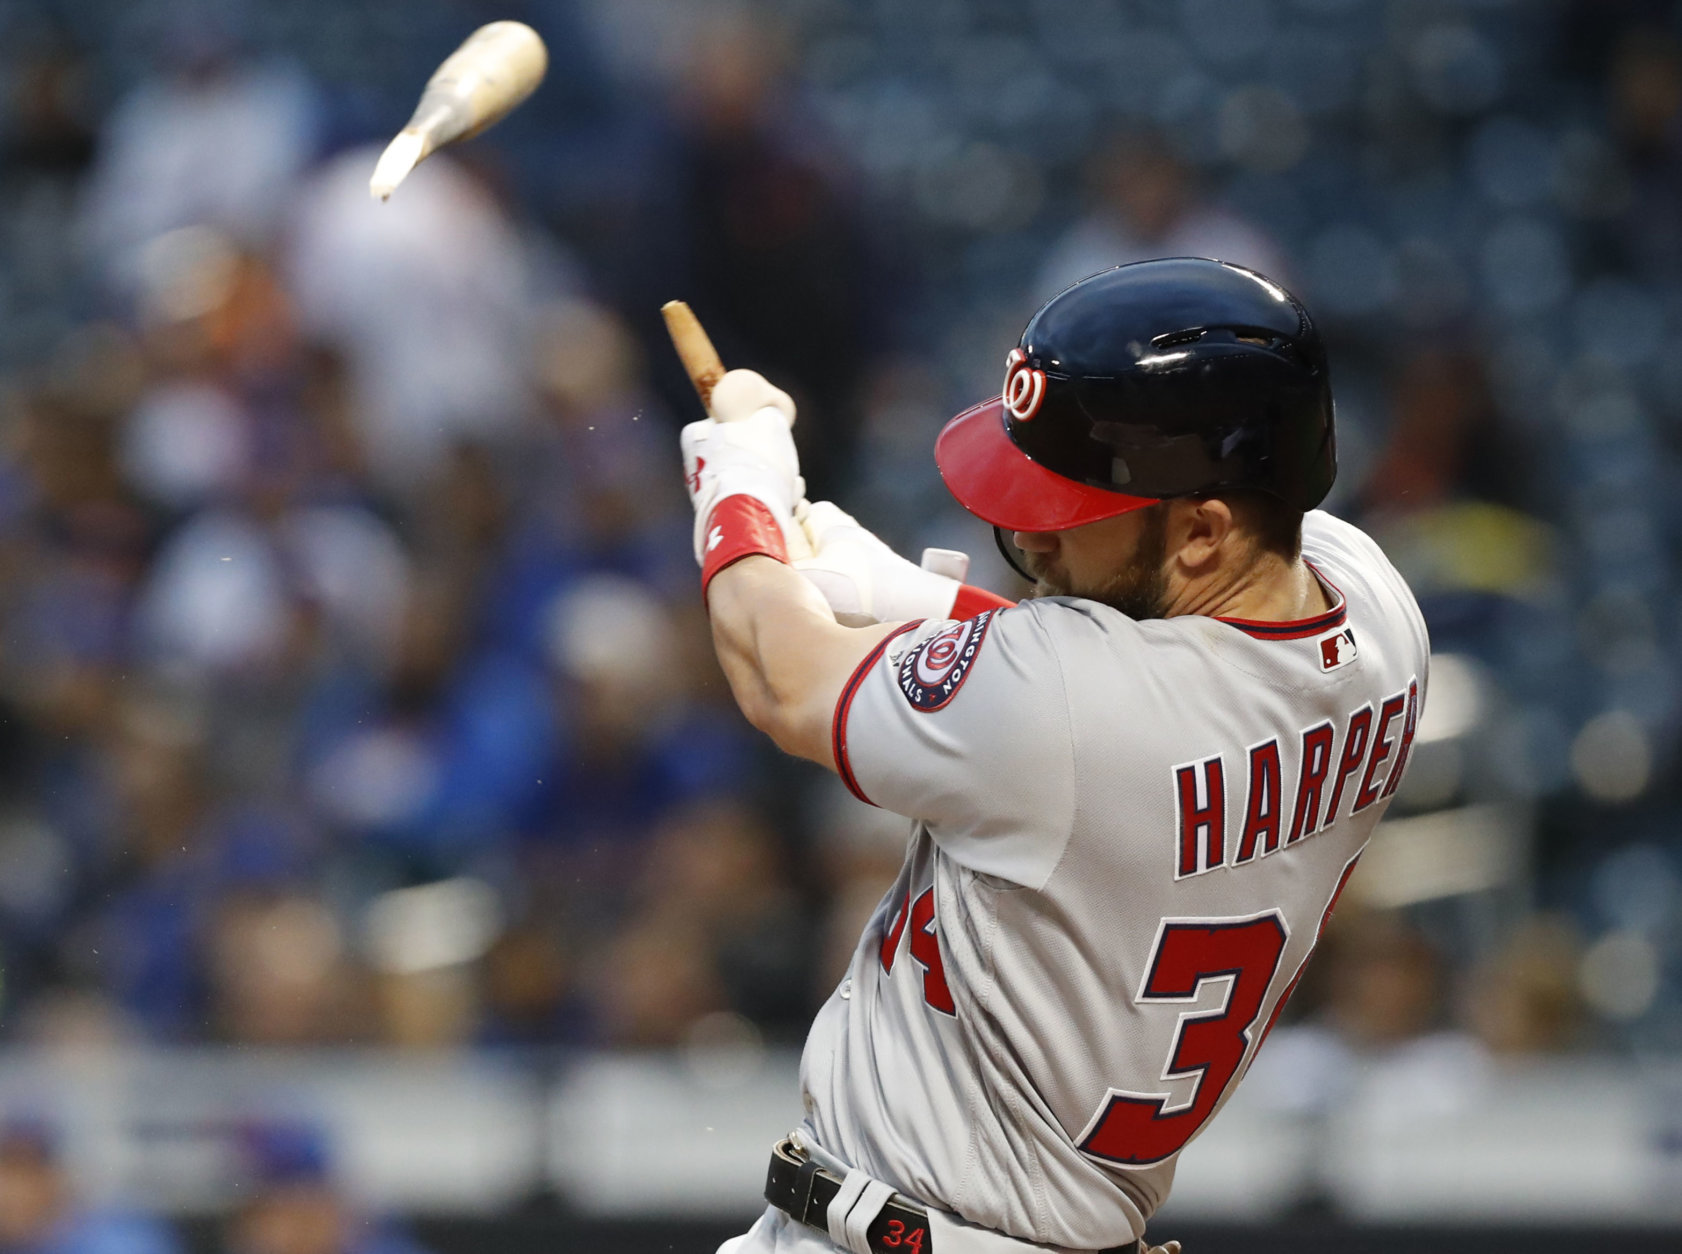 Washington Nationals' Bryce Harper hits a solo home run in the first inning of a baseball game against the New York Mets, Monday, April 16, 2018, in New York. (AP Photo/Kathy Willens)